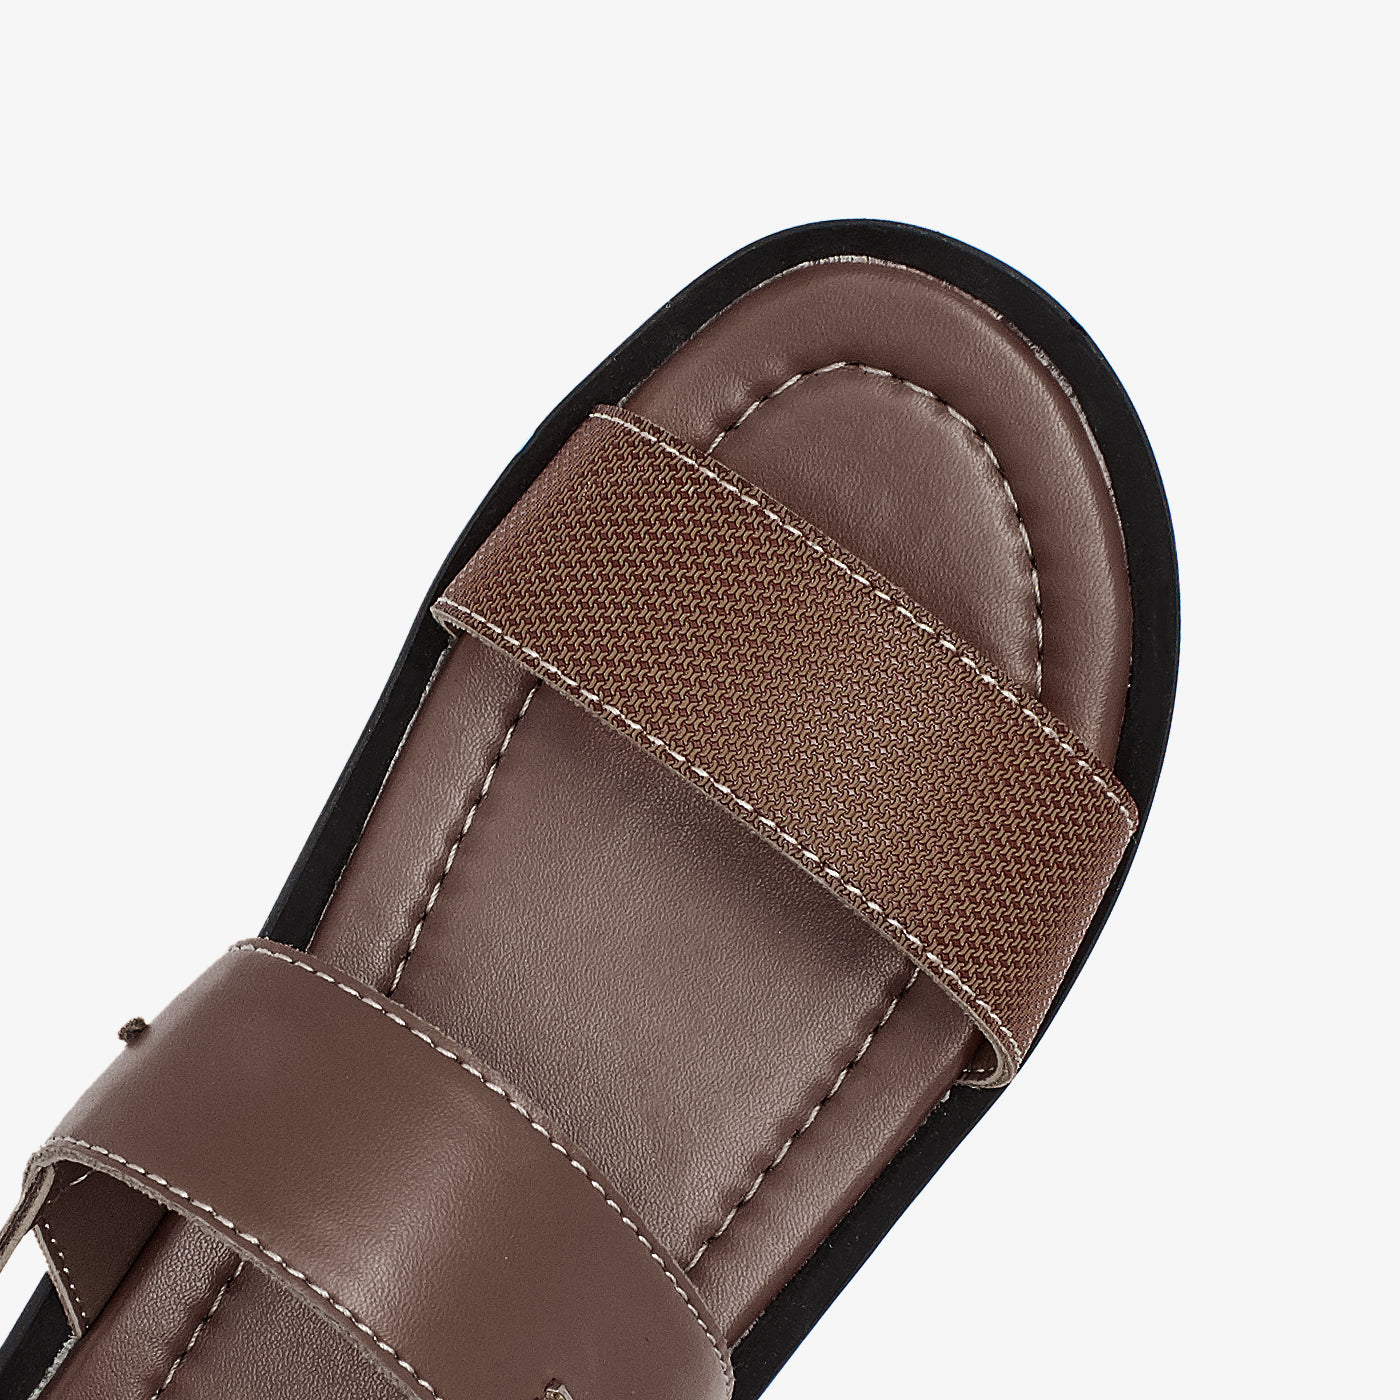 Formal sandals price in Lahore